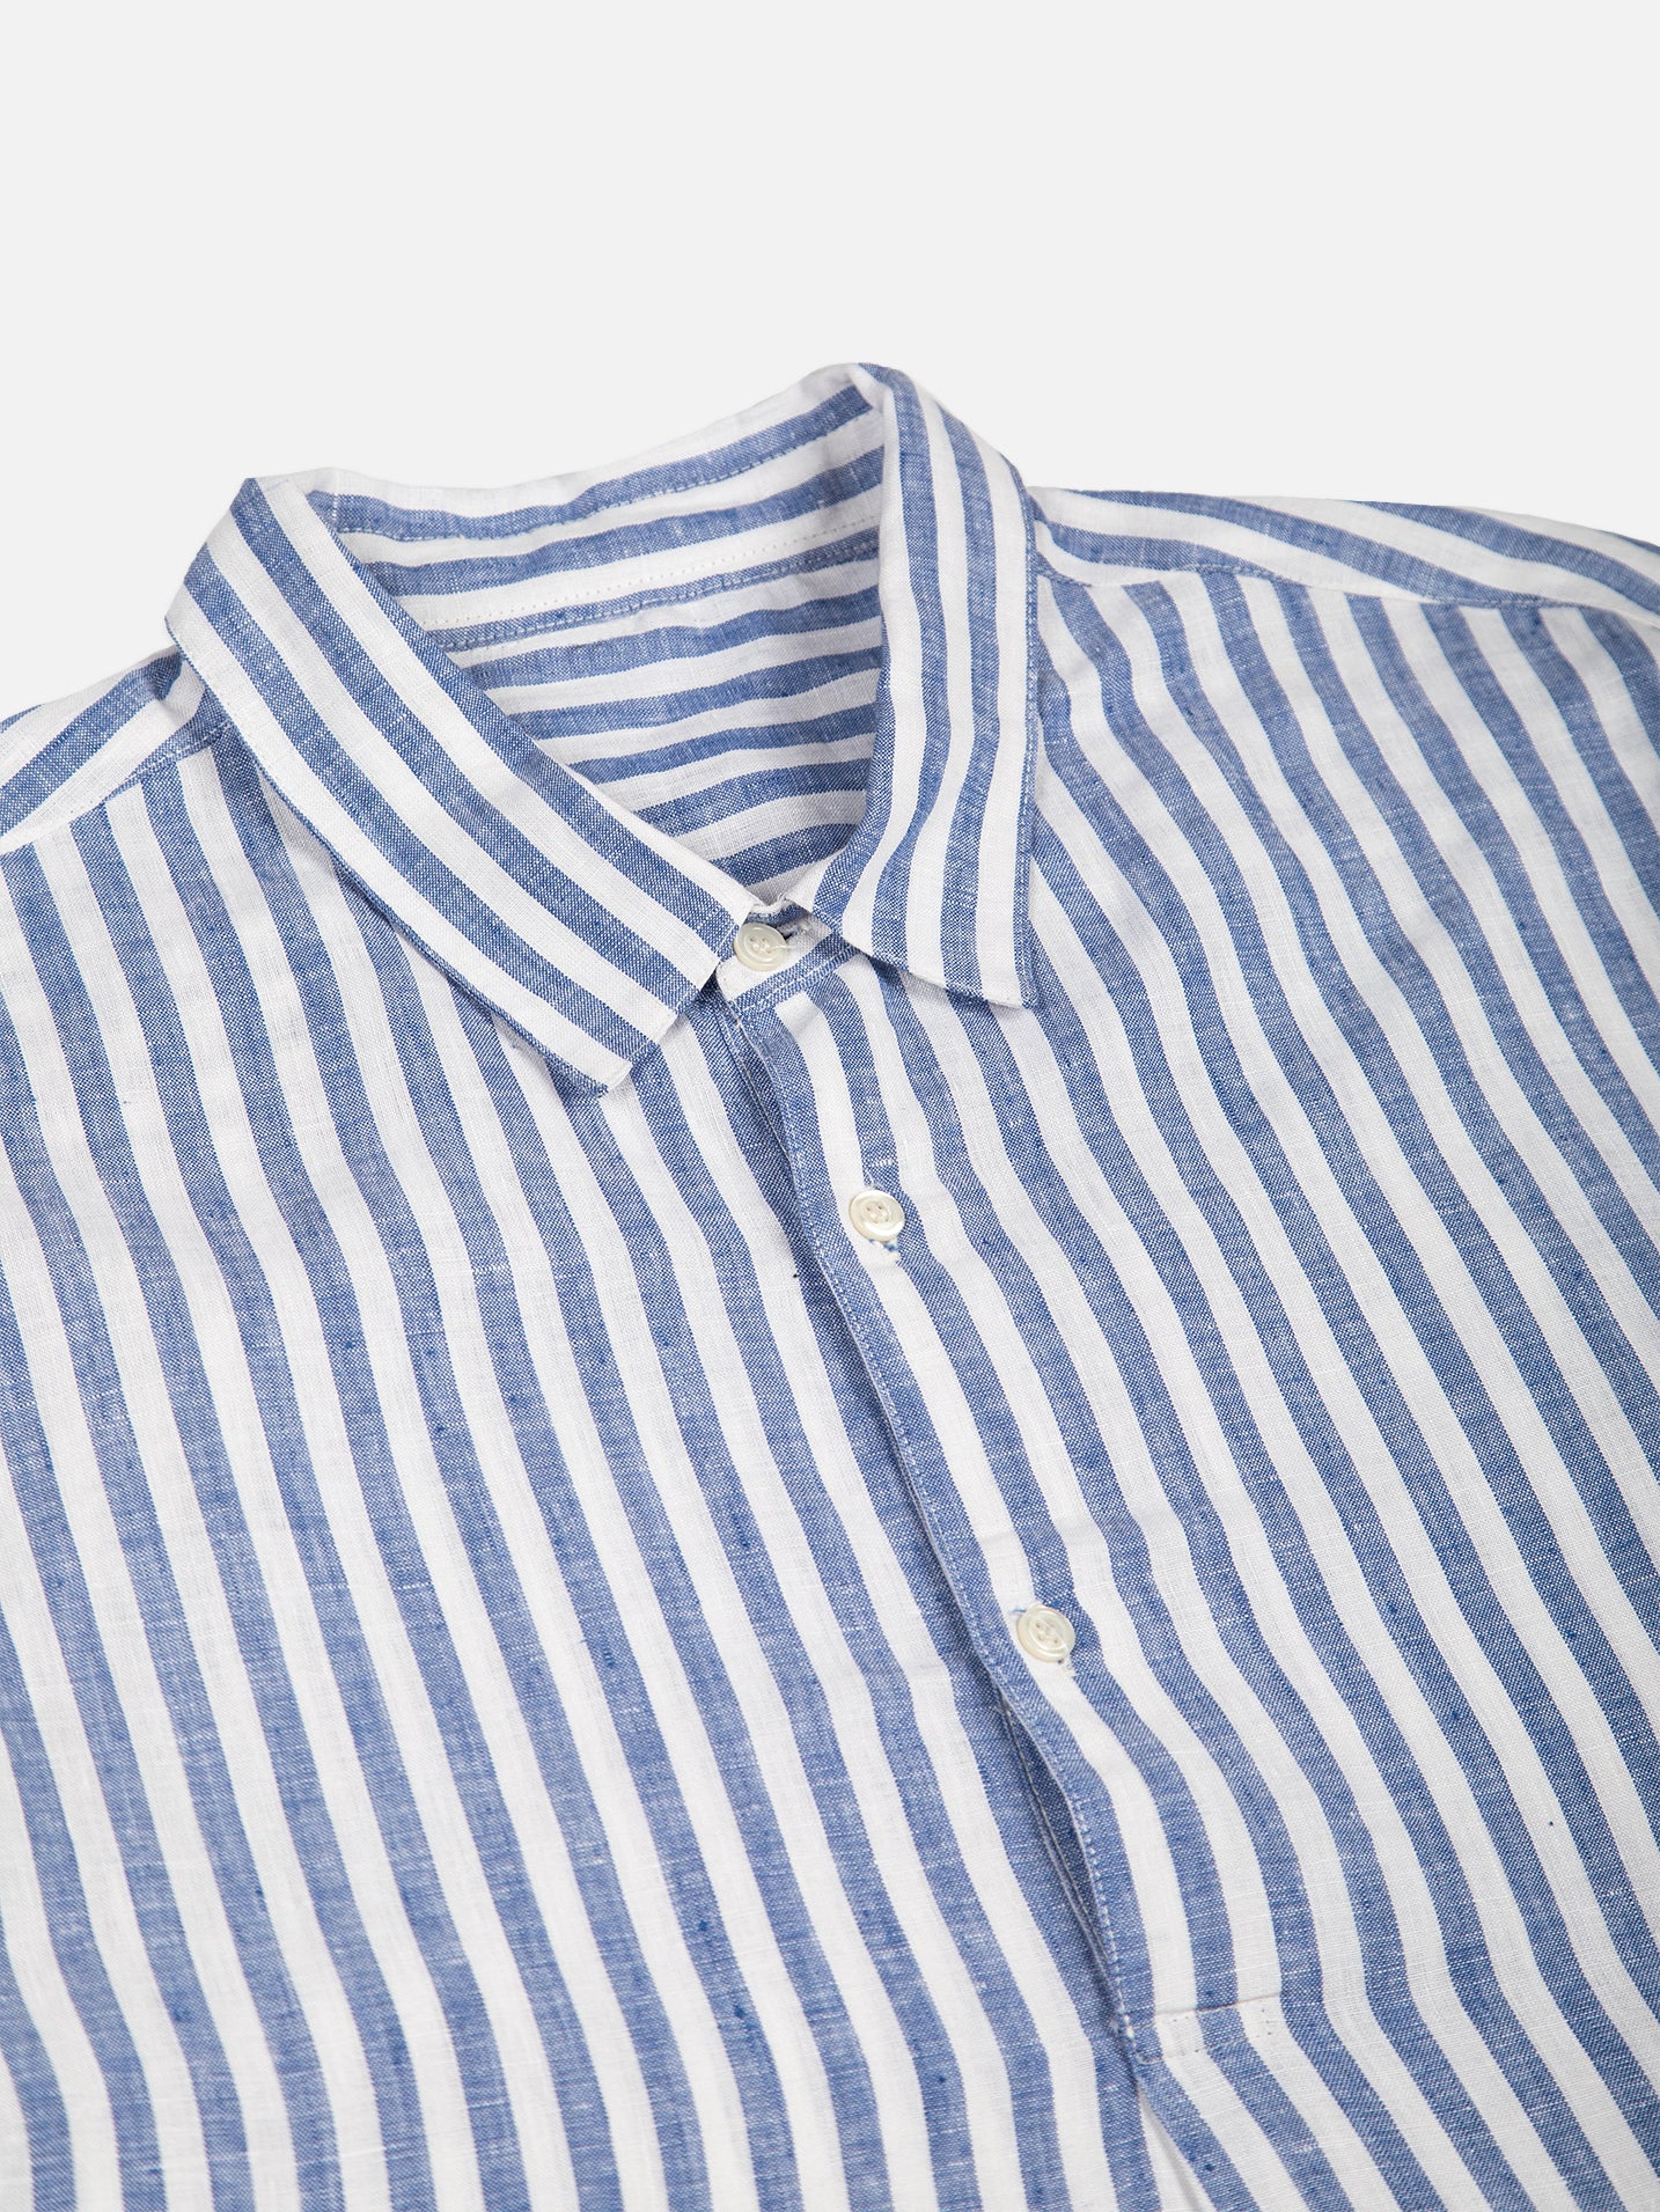 Alternate View 1 of YC Long Popover Shirt - Striped Blue